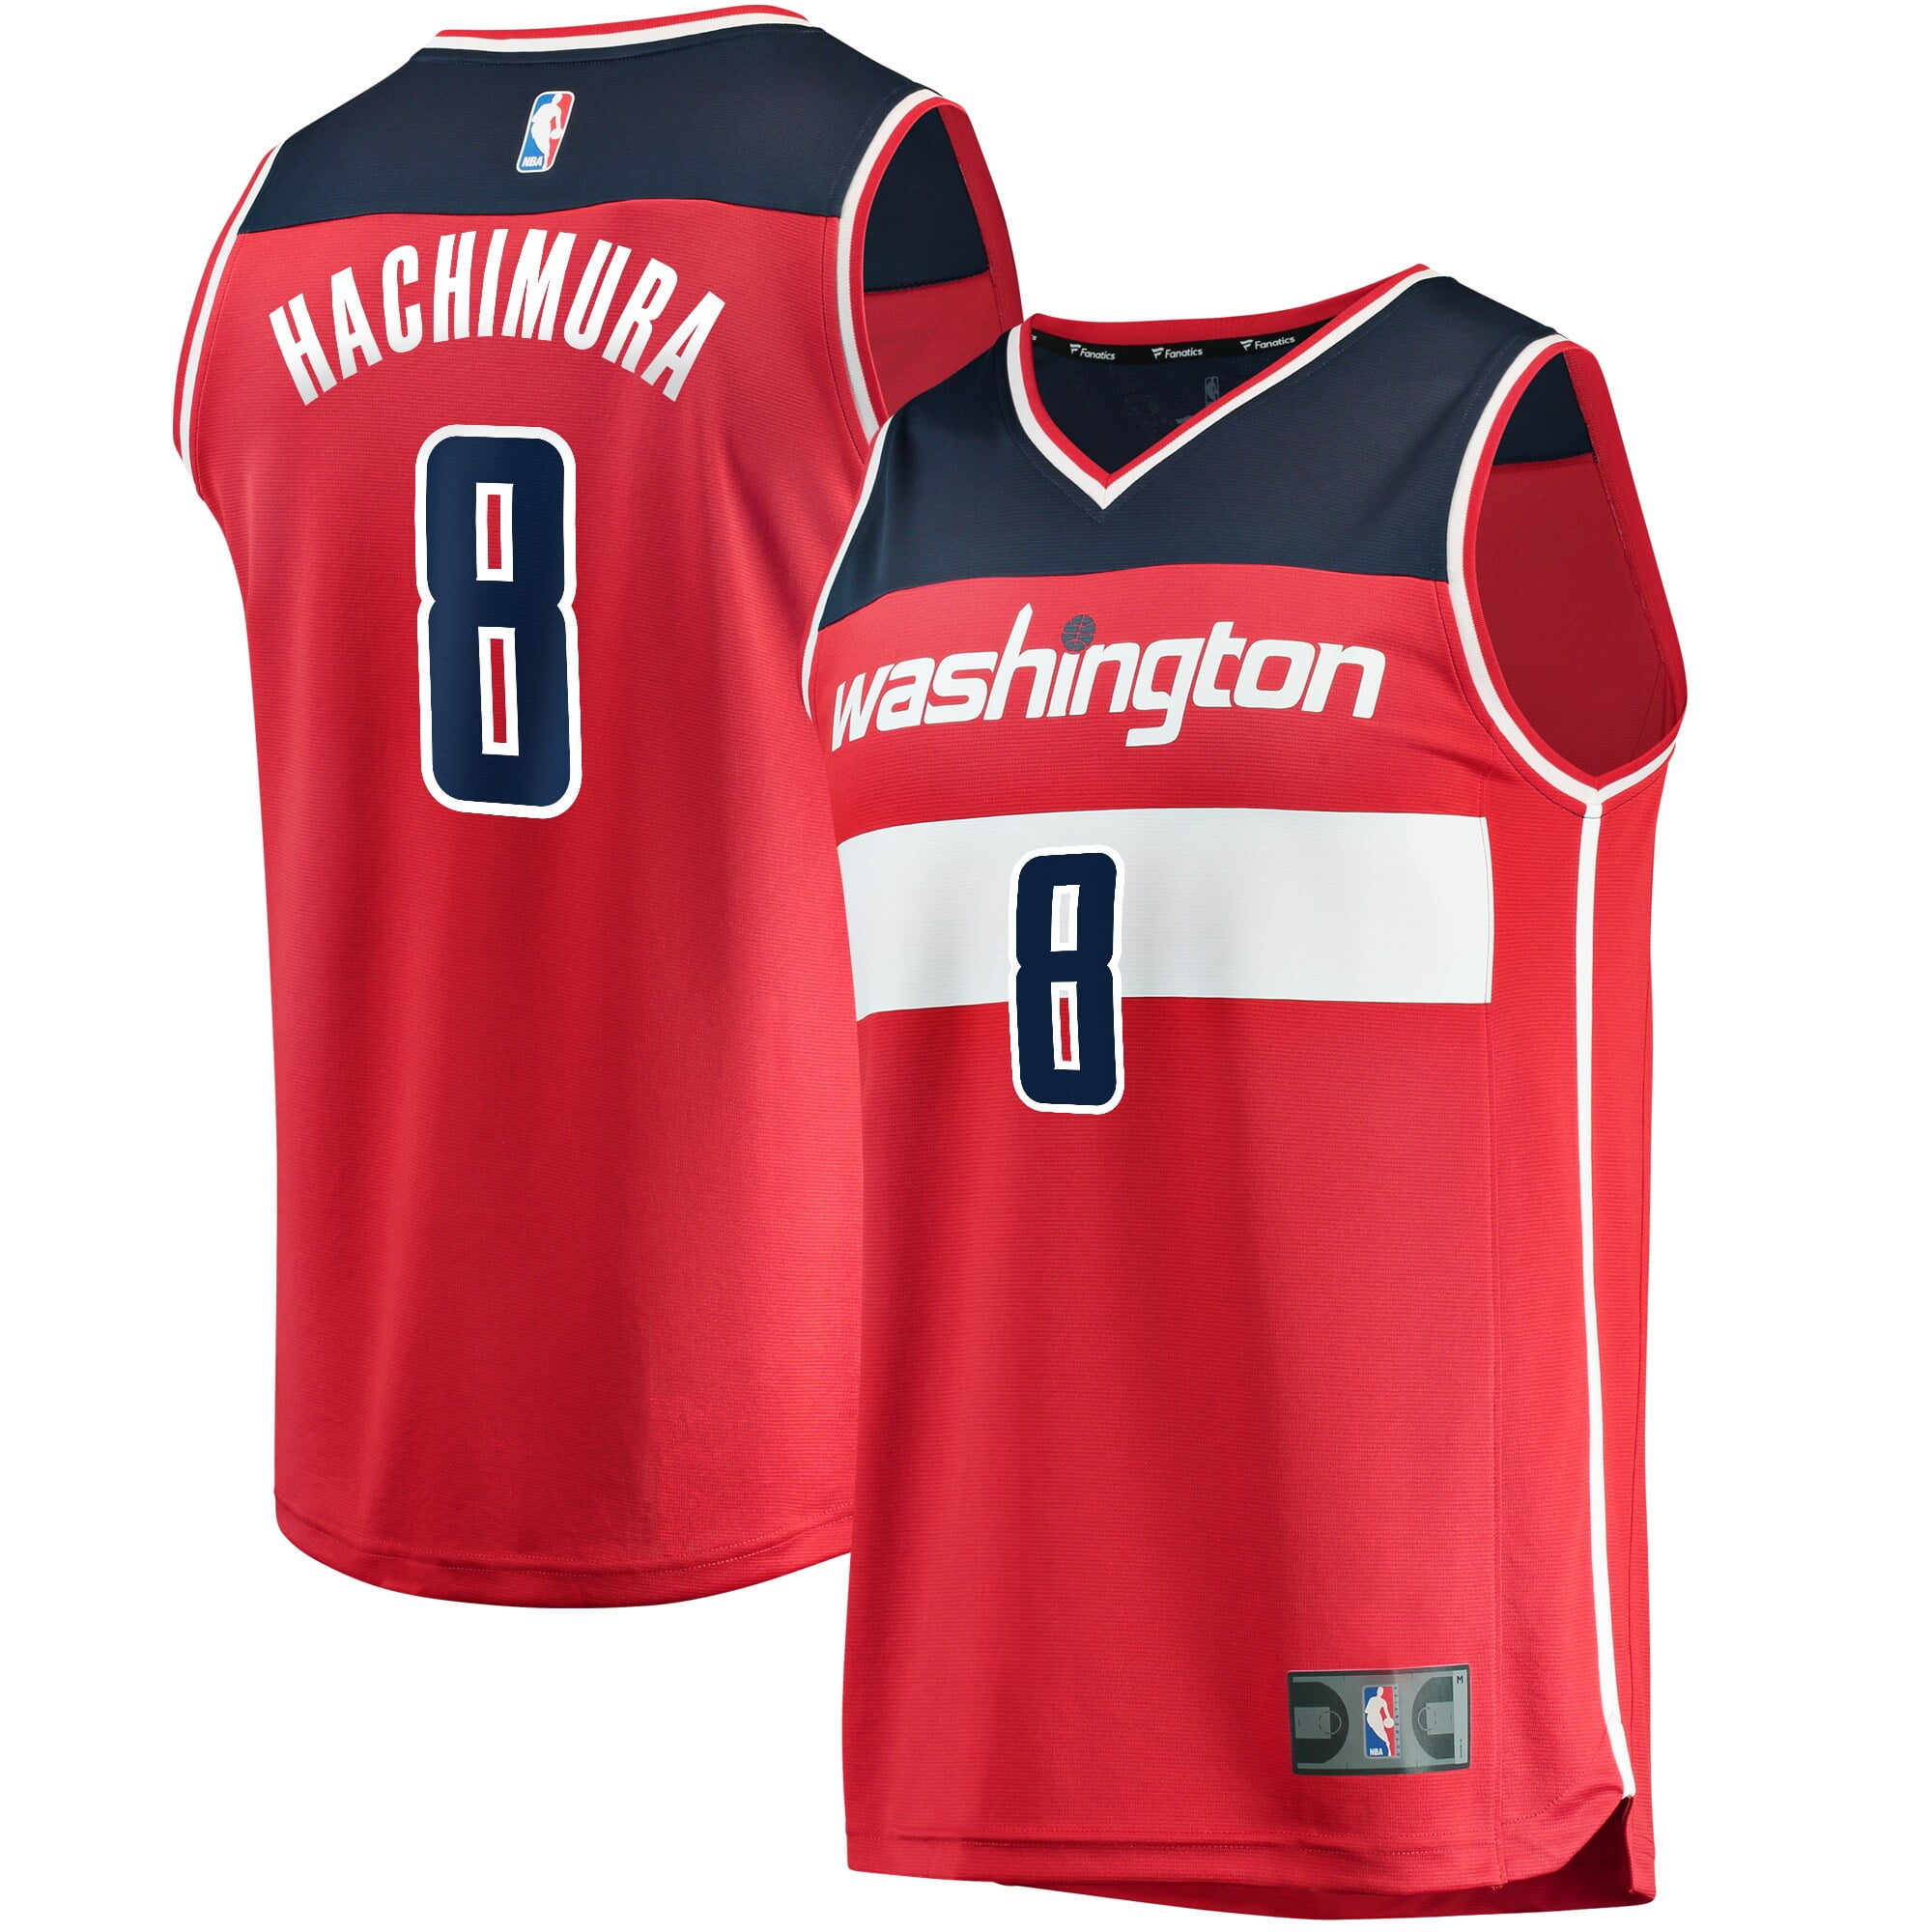 classic wizards jersey